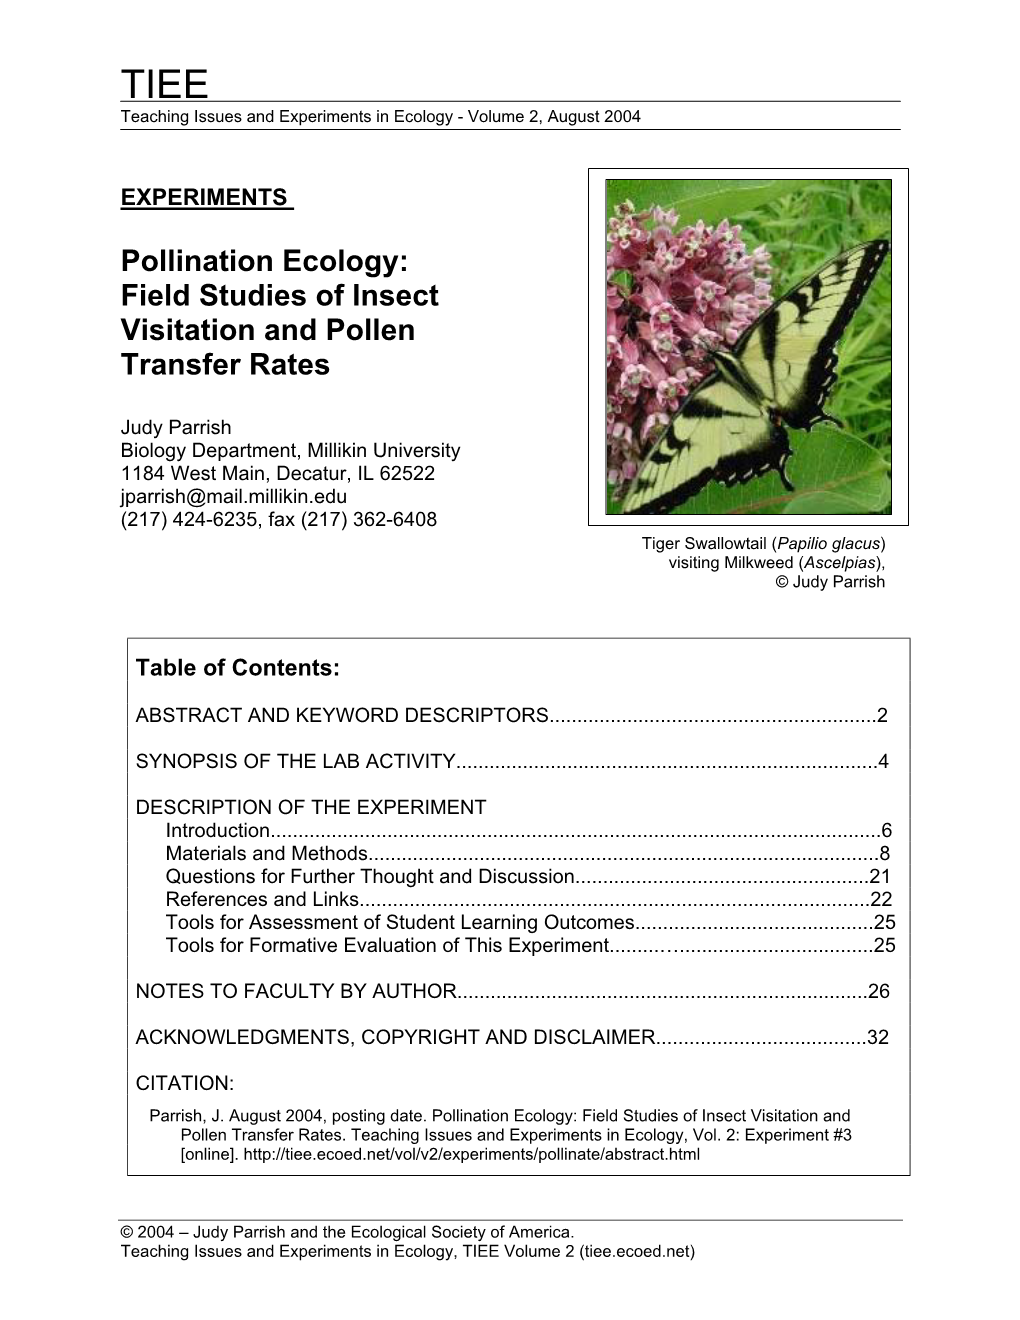 Pollination Ecology: Field Studies of Insect Visitation and Pollen Transfer Rates